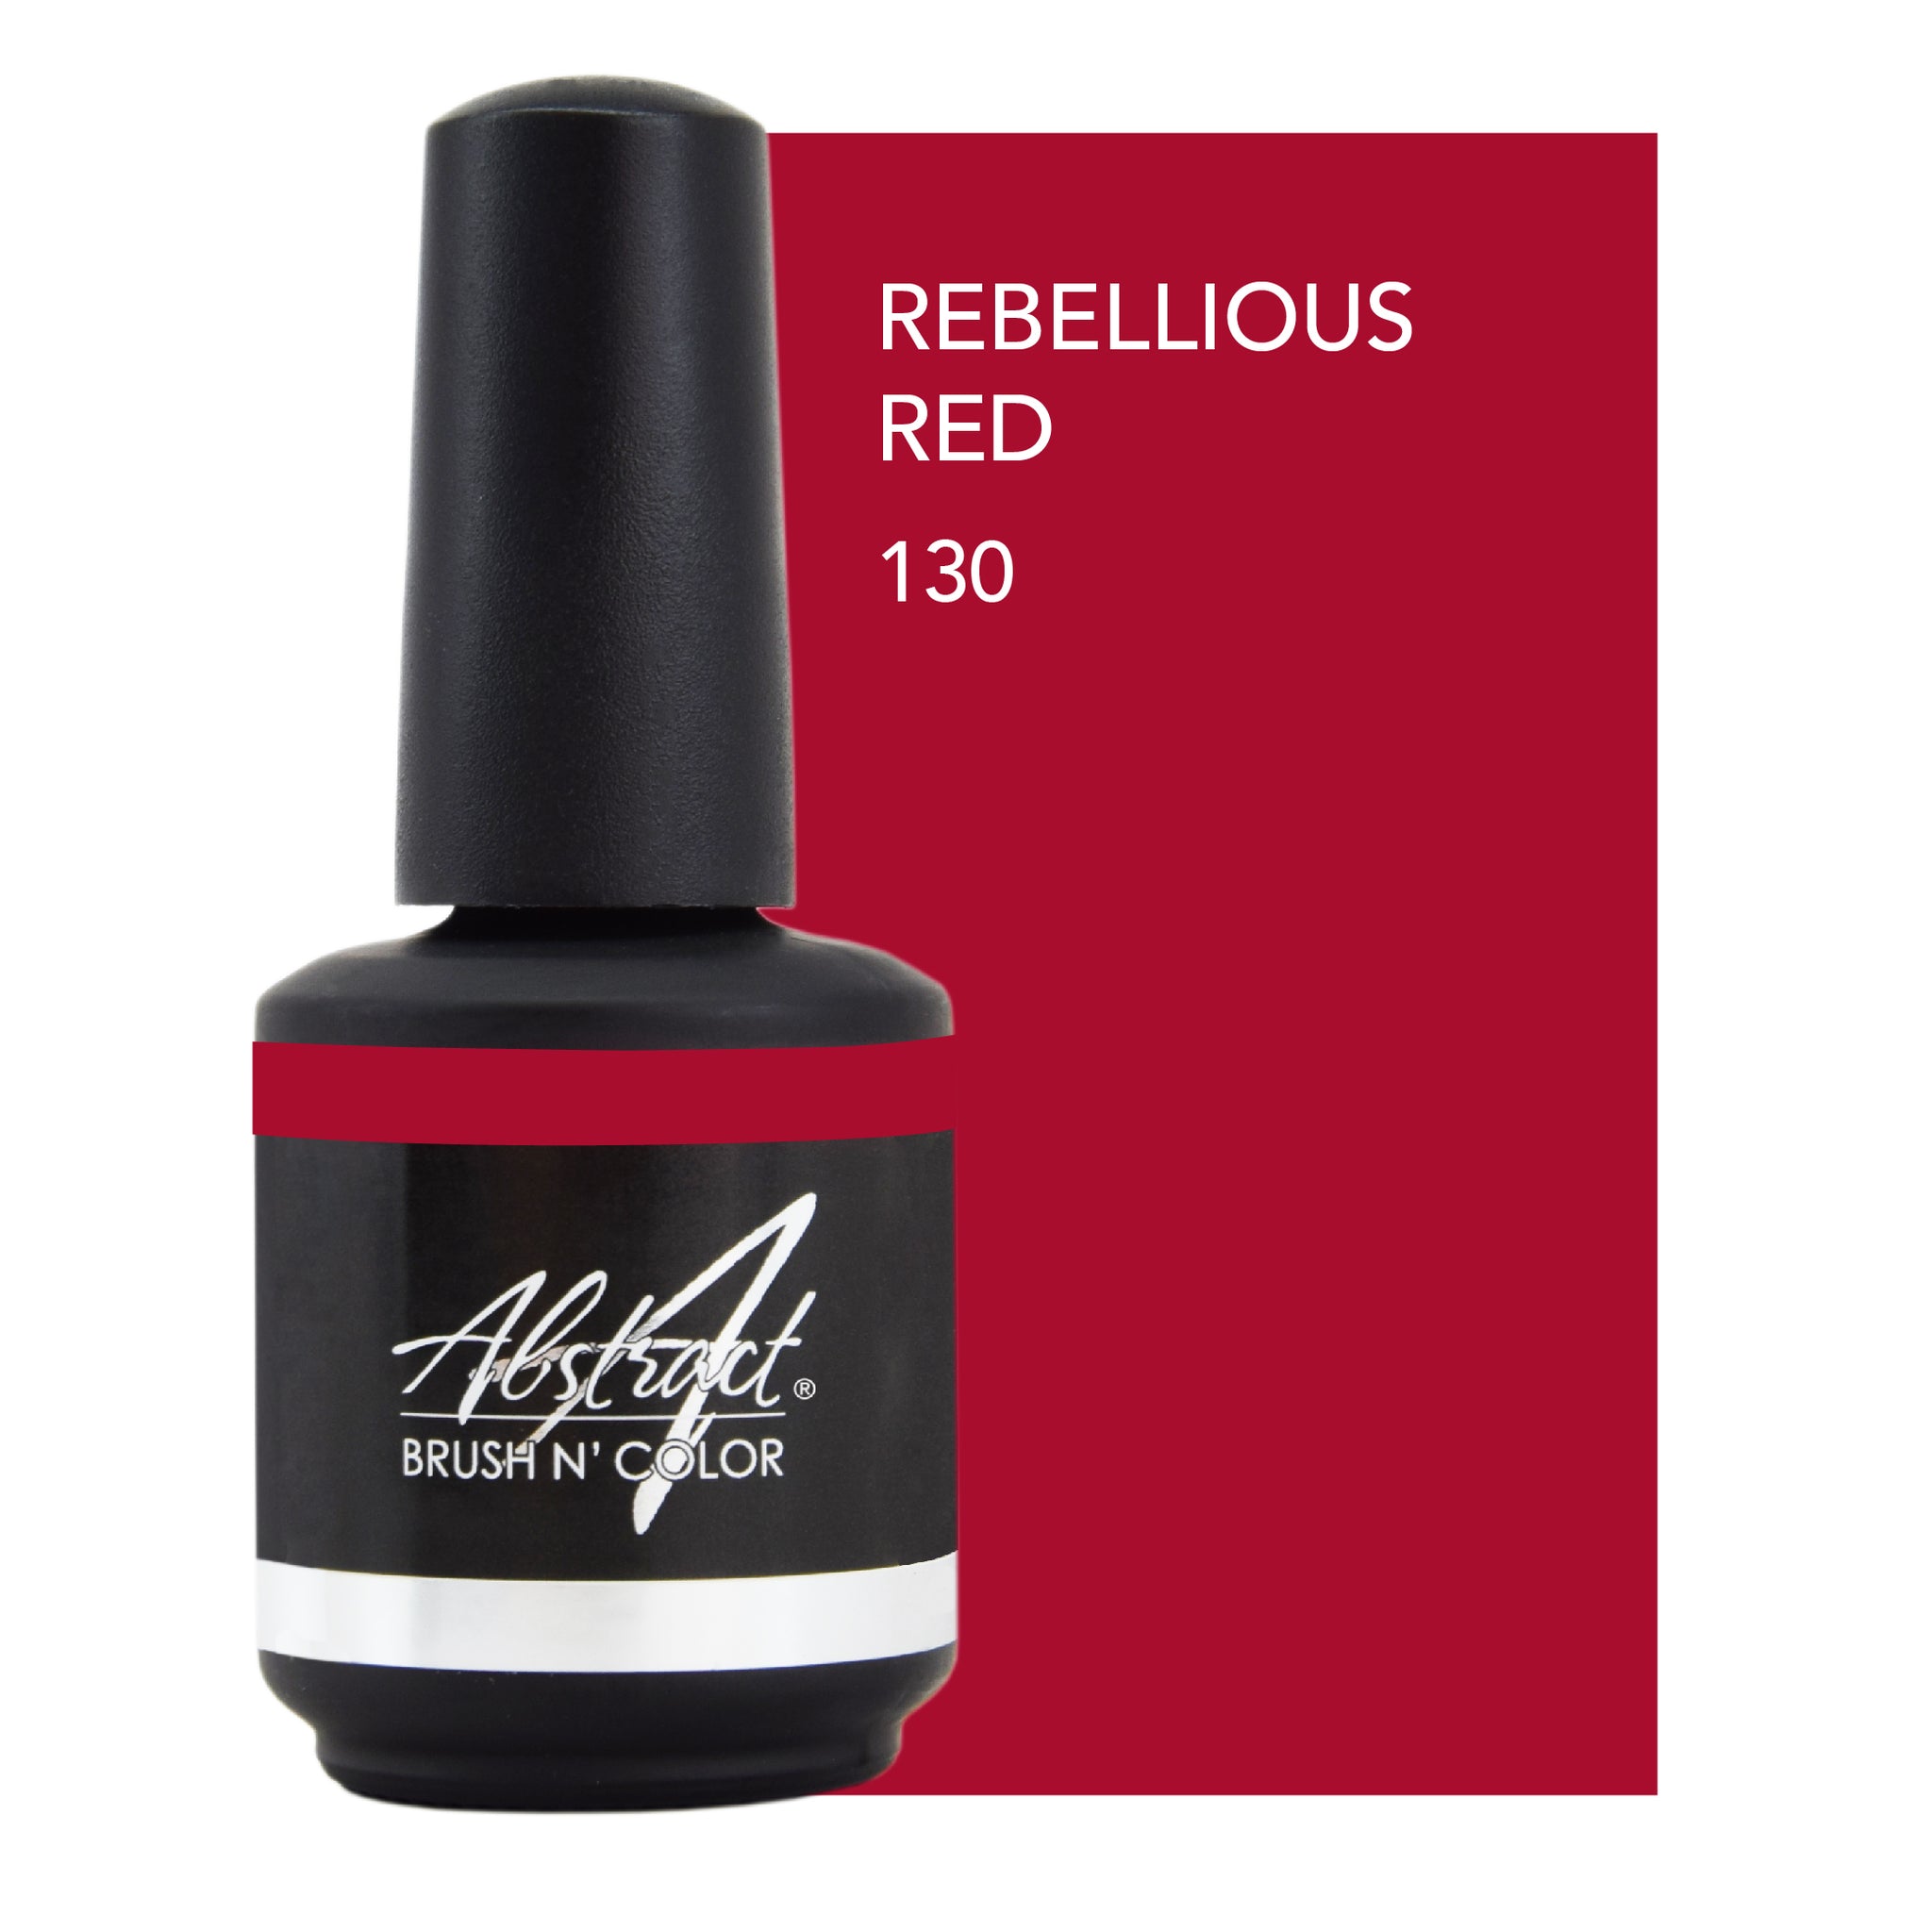 Rebellious Red